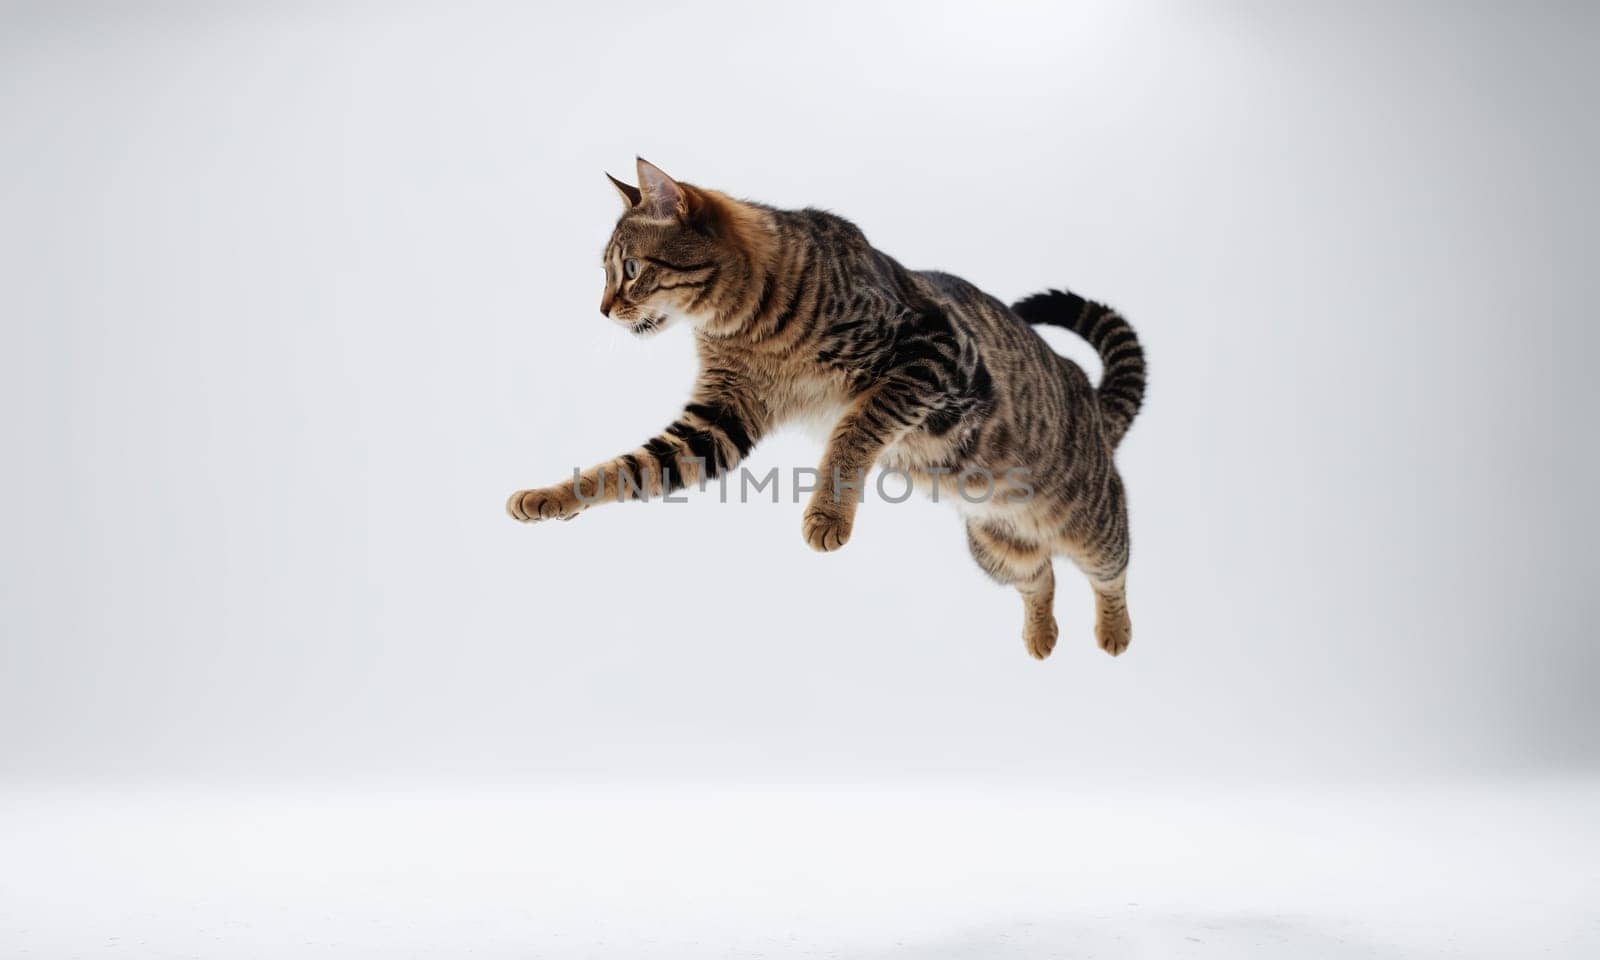 A Felidae carnivore, the Cat is a small to mediumsized terrestrial animal with a fur coat, whiskers, and a tail, jumping in the air on a white background, displaying exceptional balance